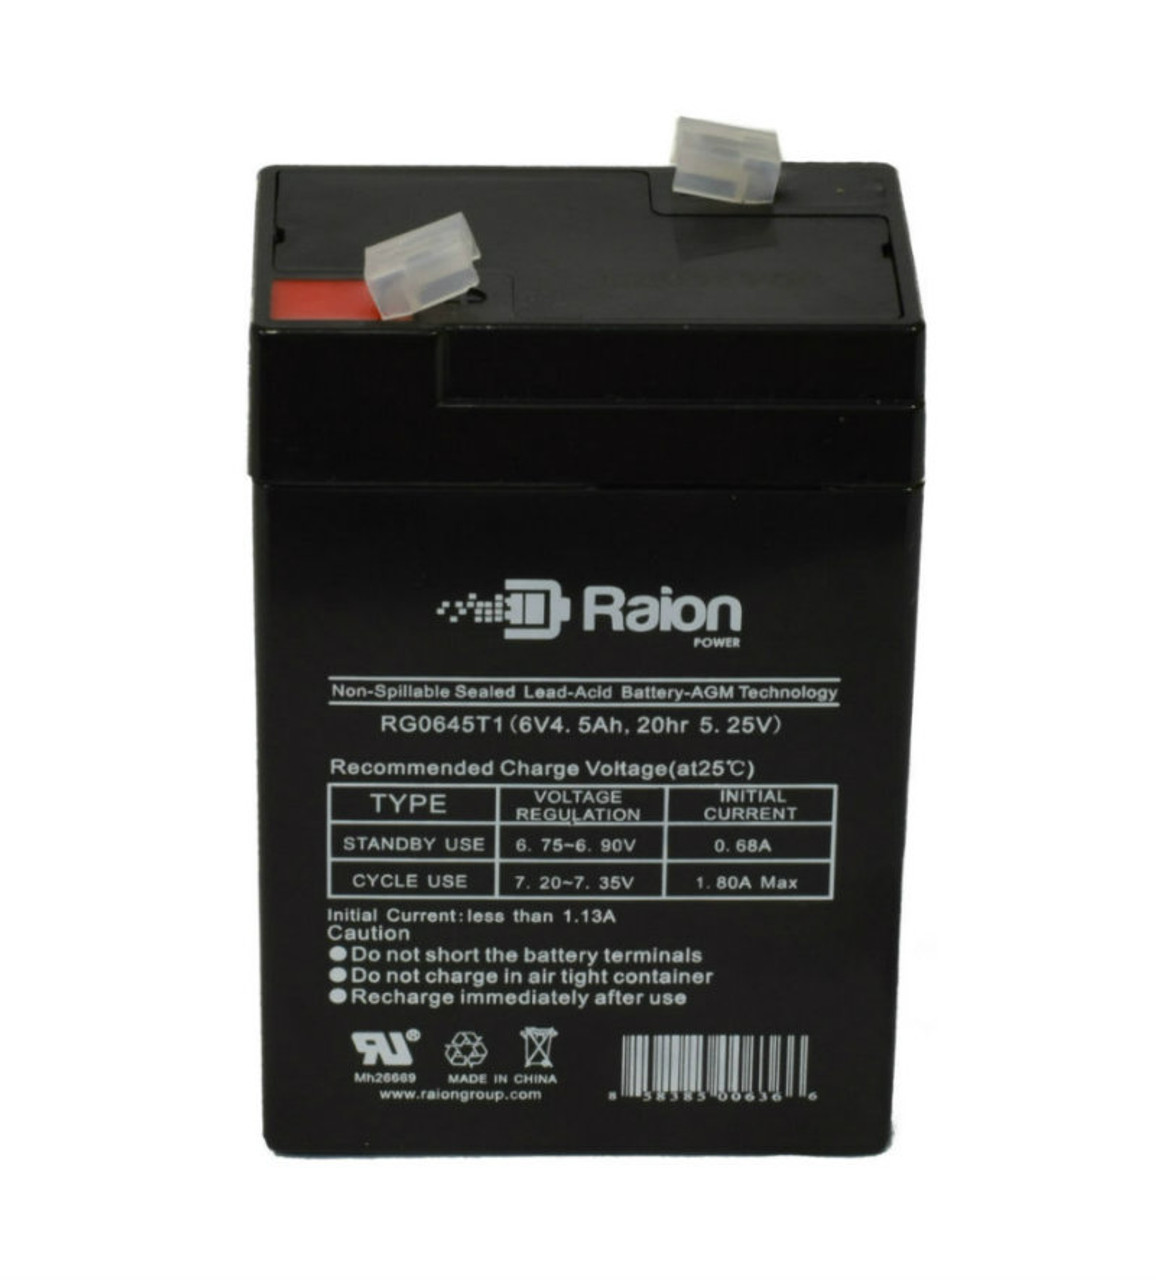 Raion Power RG0645T1 Replacement Battery Cartridge for Chloride 100-001-0224